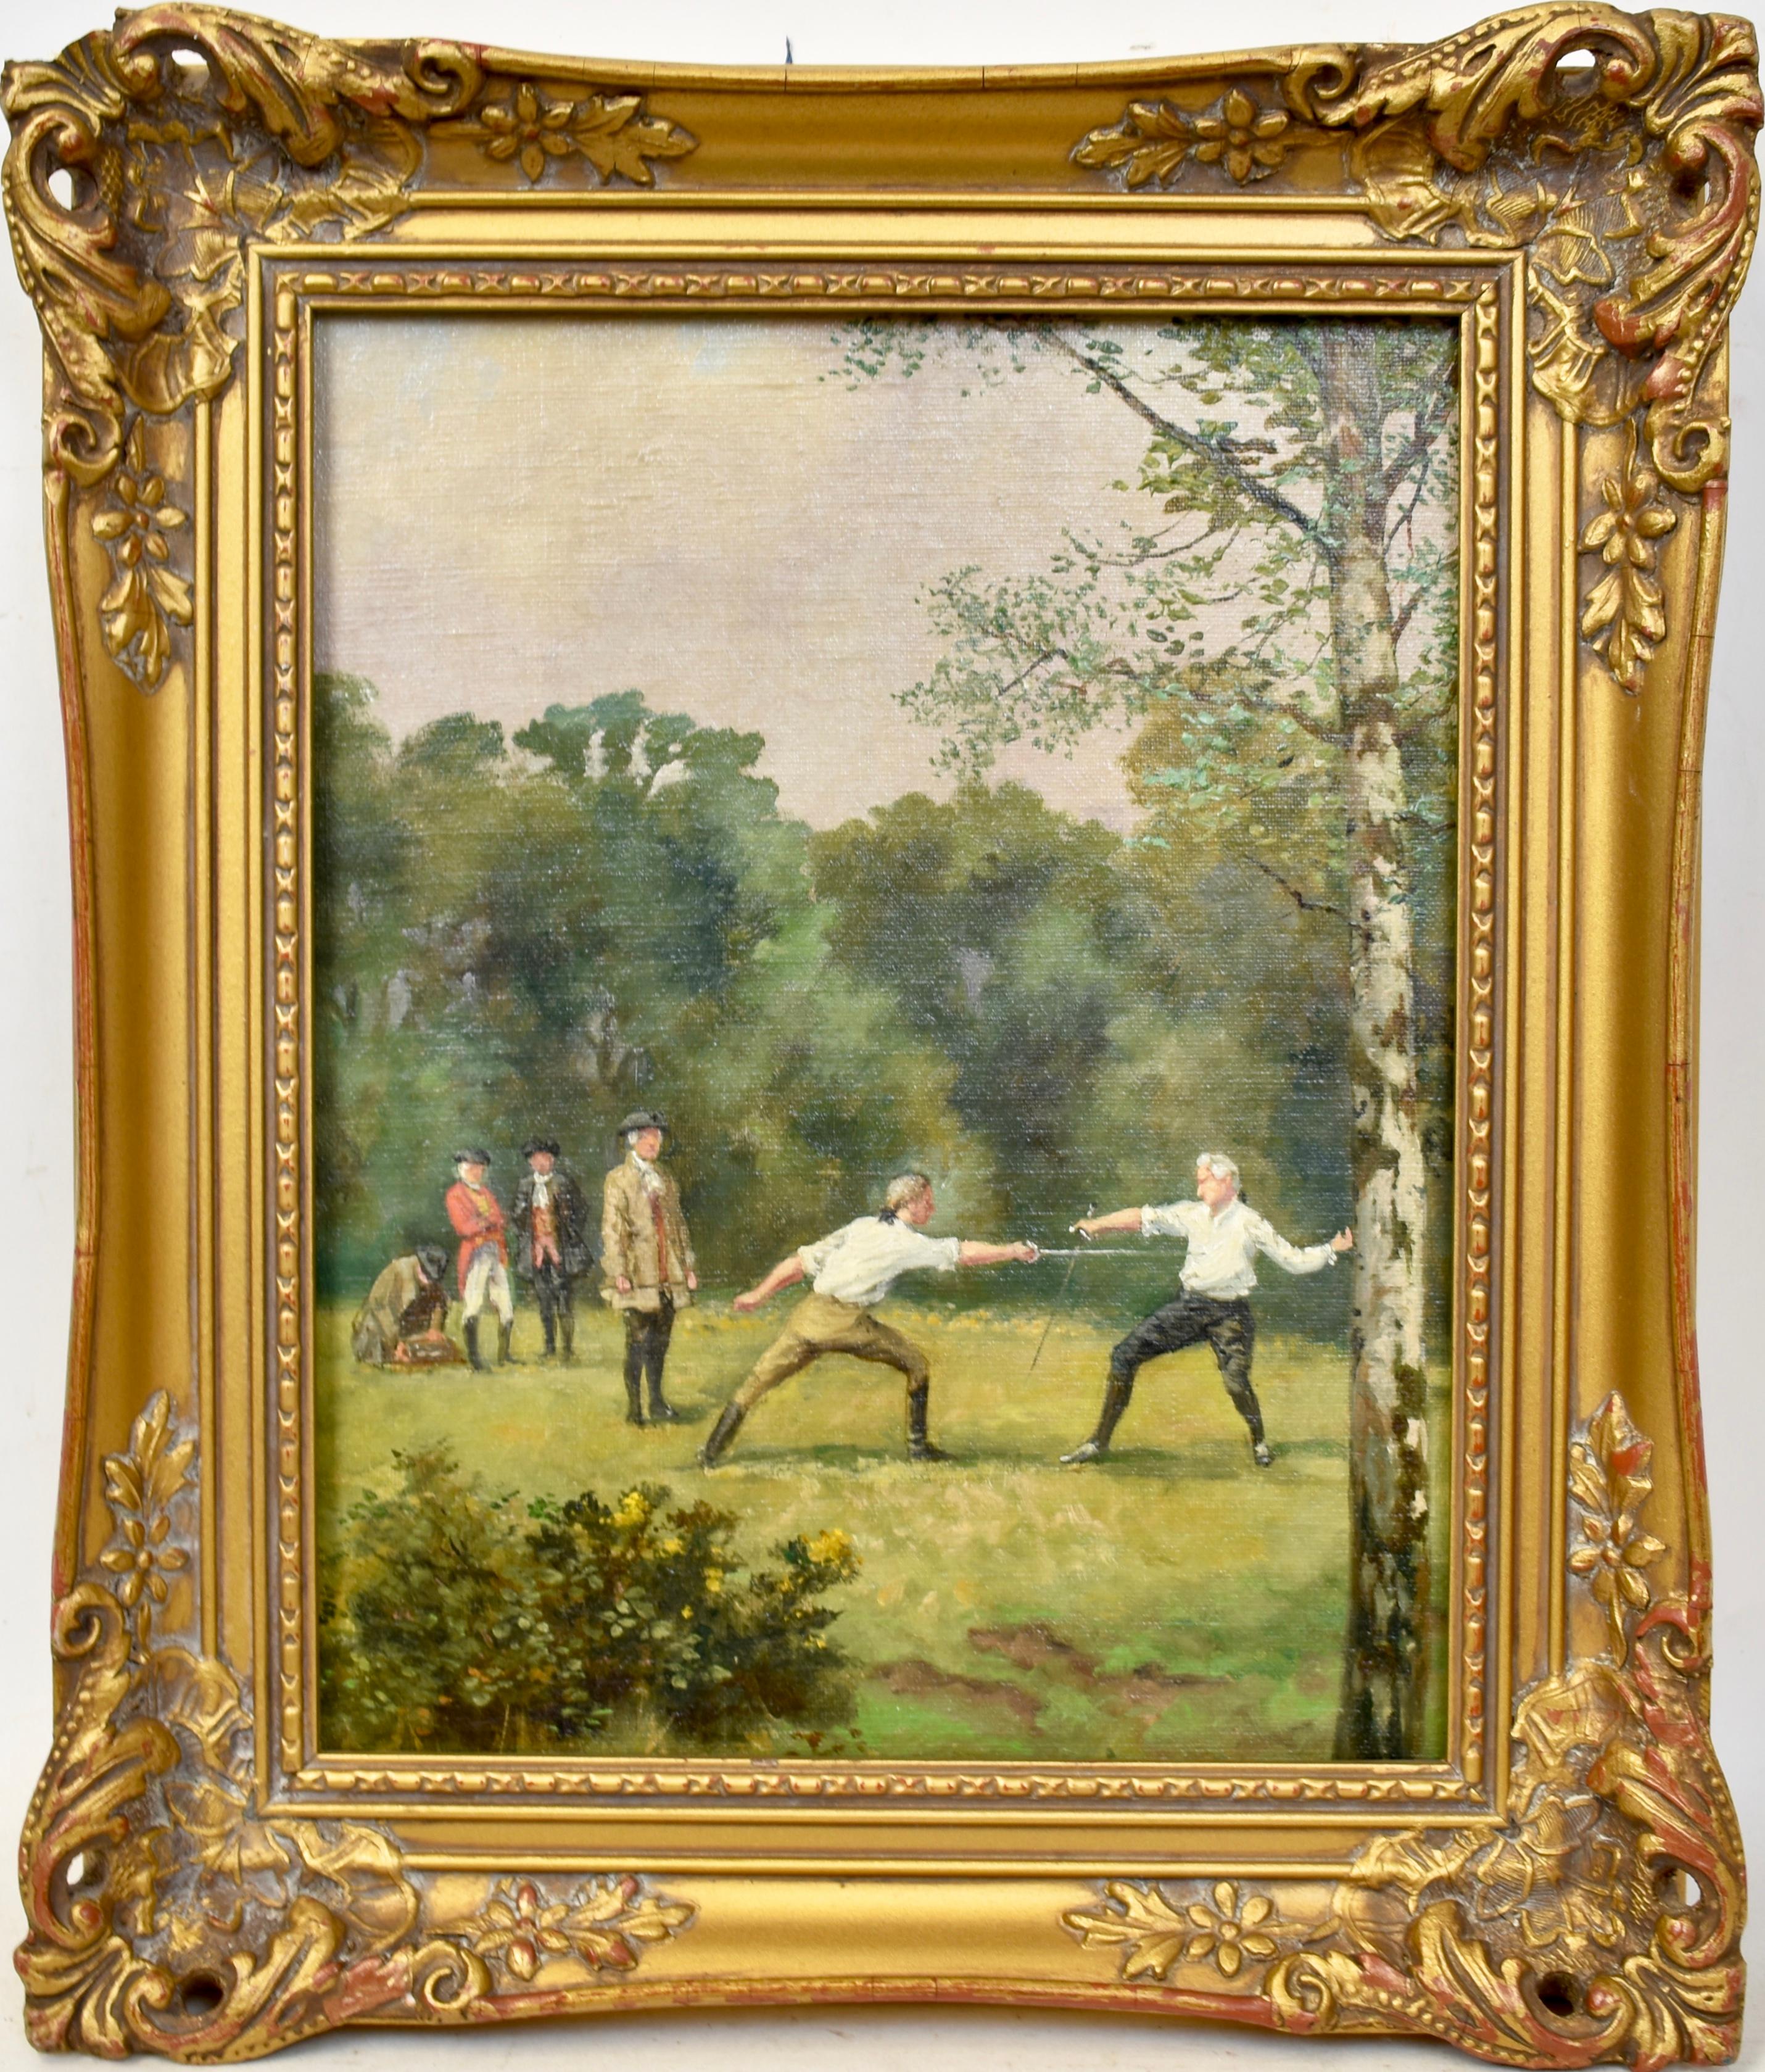 George Derville Rowlandson  (1861 - 1928) Landscape Painting - Antique English Sporting Art, Fencing in the Woods, Original Rare Oil Painting